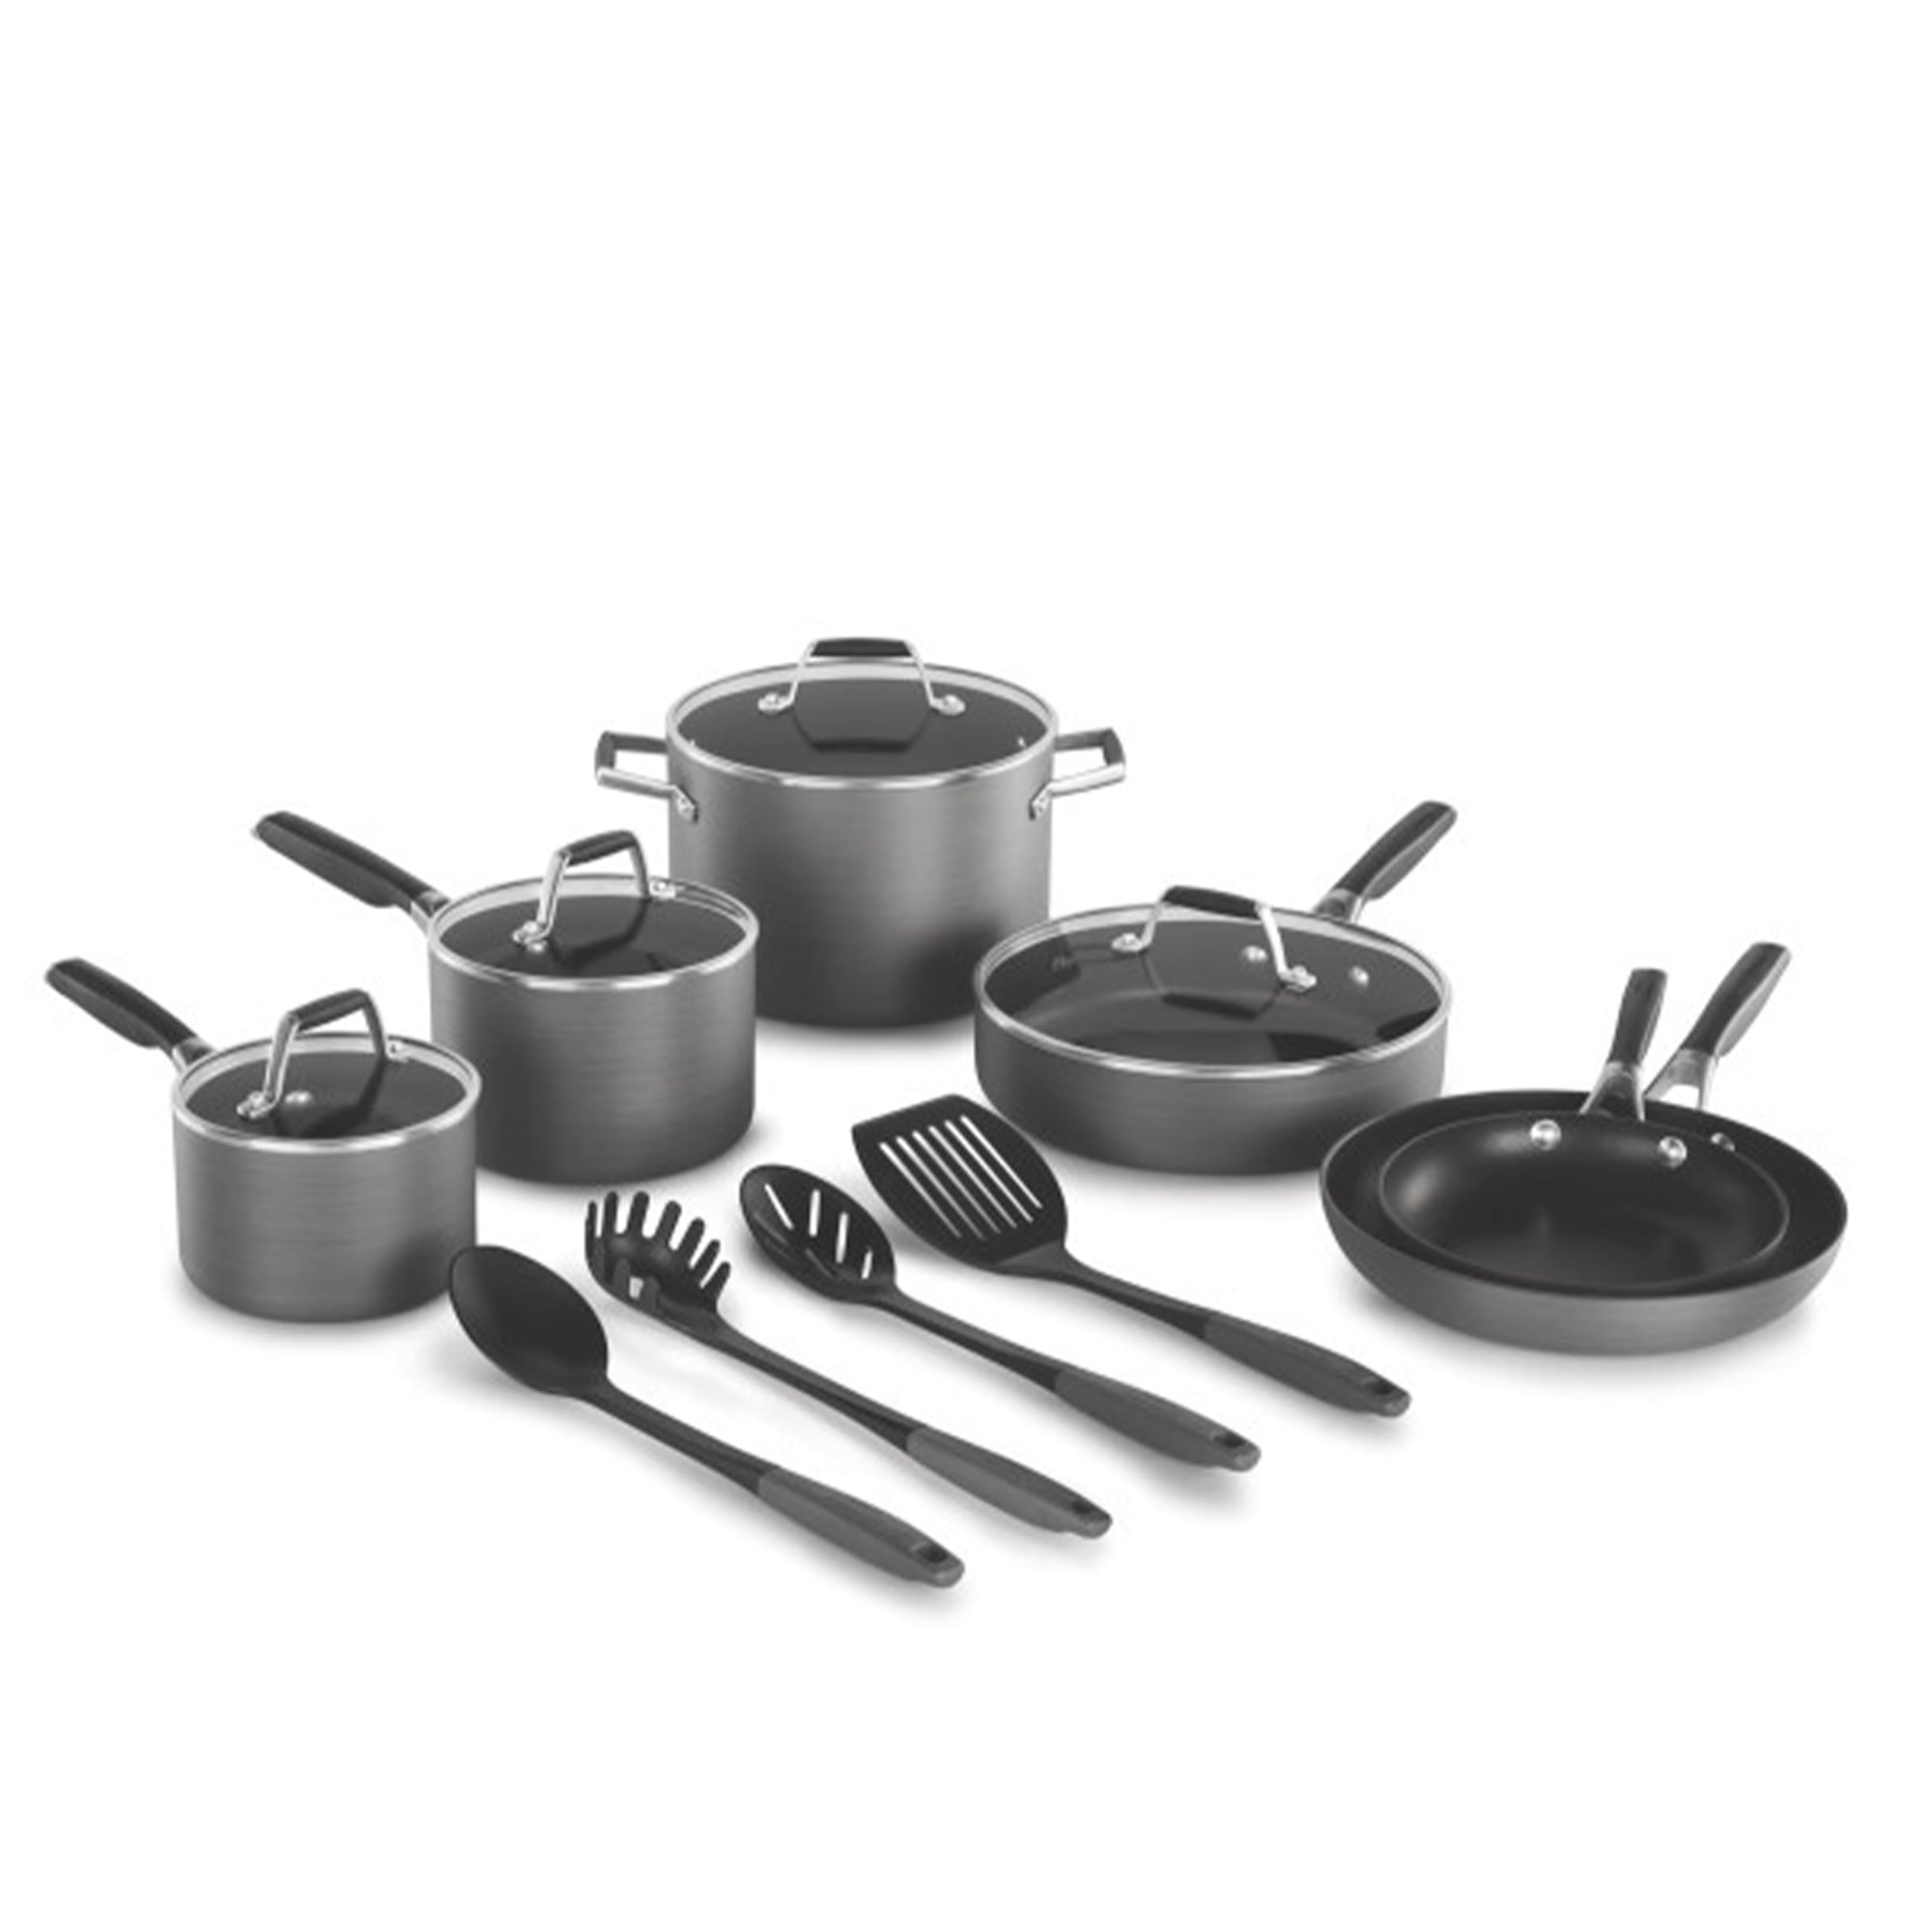 Calphalon 15-Piece Pots and Pans Set, Stackable Nonstick Kitchen Cookware  with Stay-Cool Stainless Steel Handles, Black